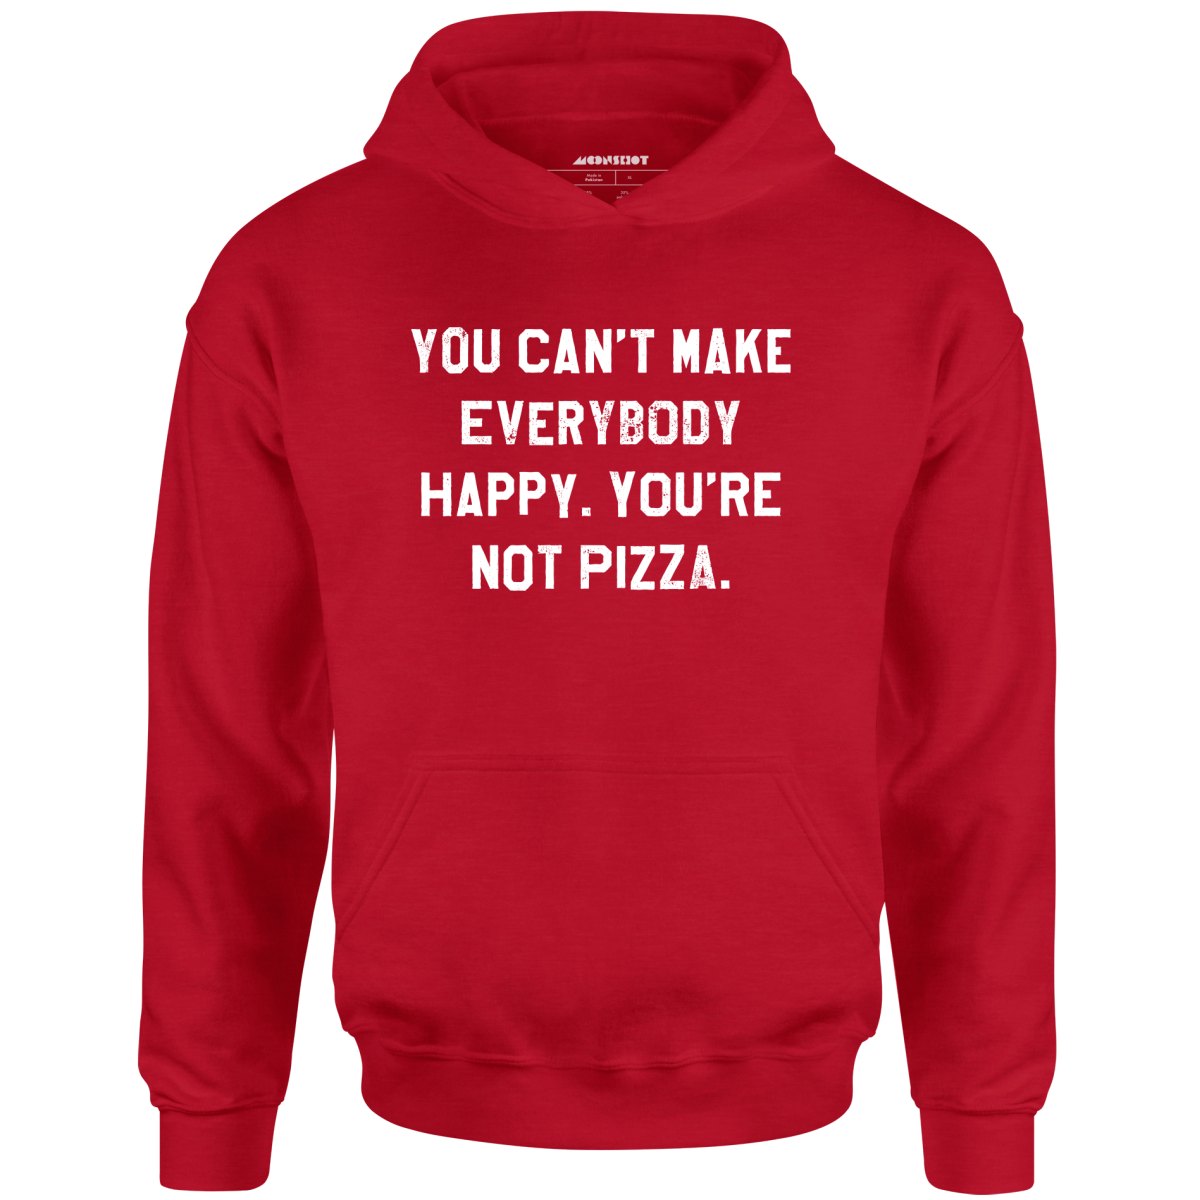 You Can't Make Everybody Happy - Unisex Hoodie